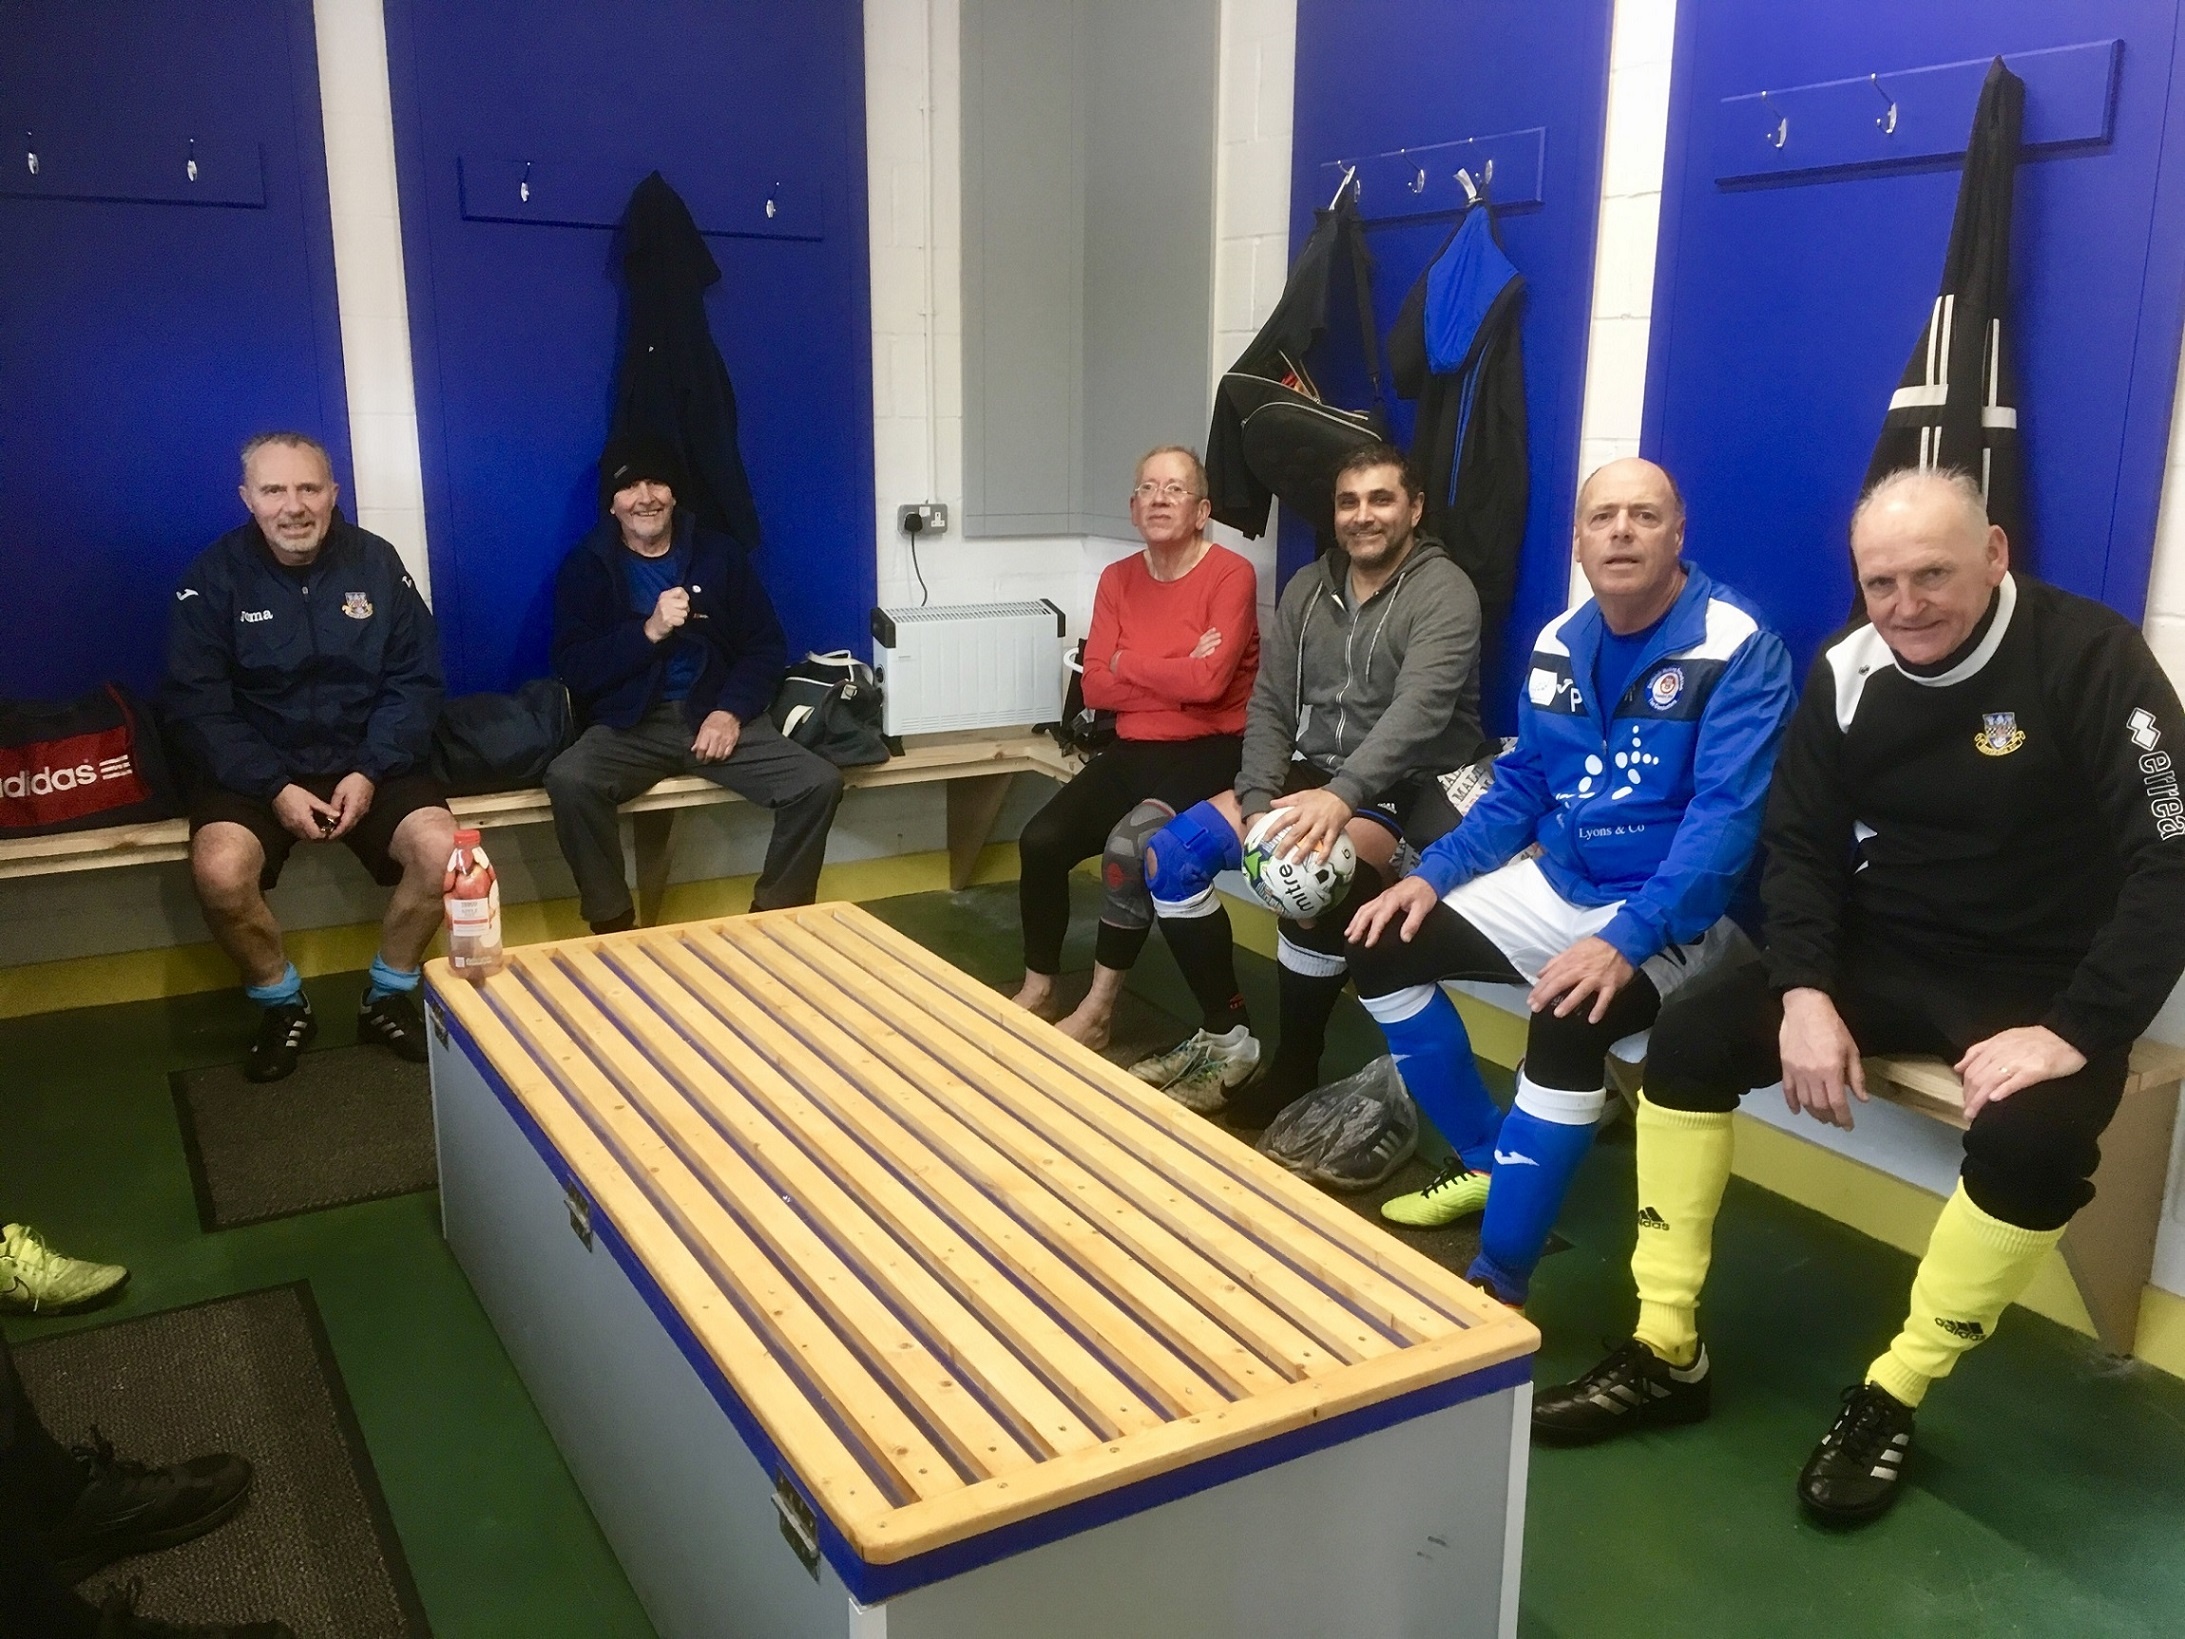 Some of the Eastleigh Walking Footballers making use of their new facilities